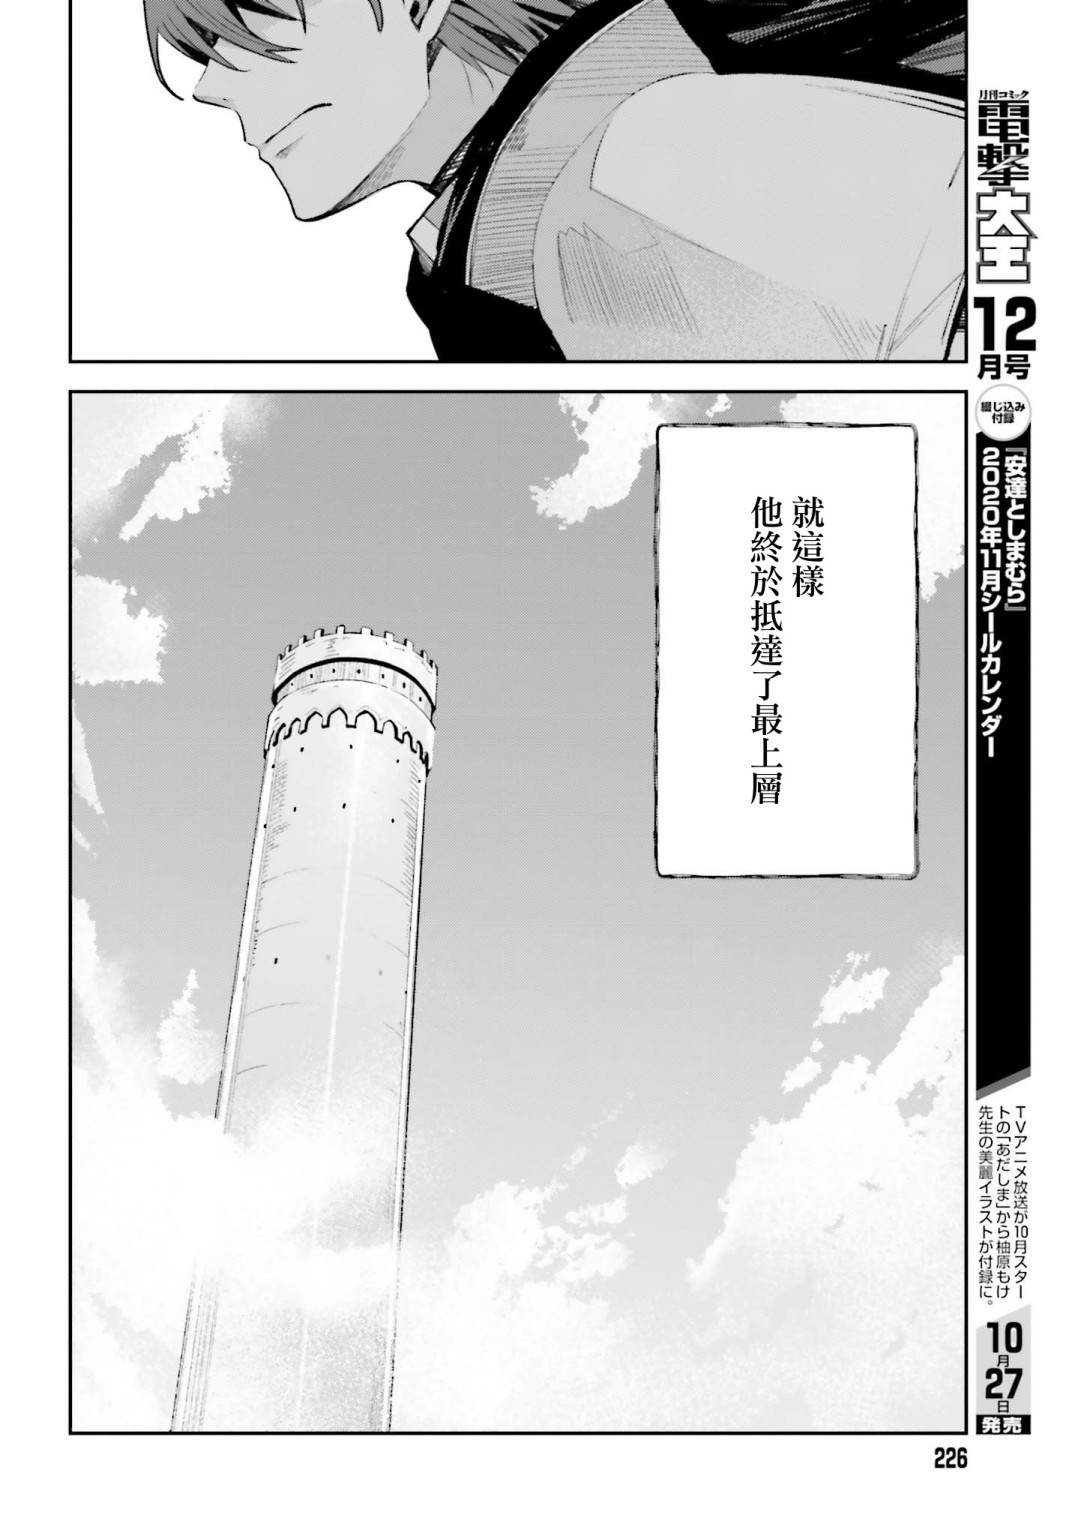 Unnamed Memory - 第01話(1/2) - 4